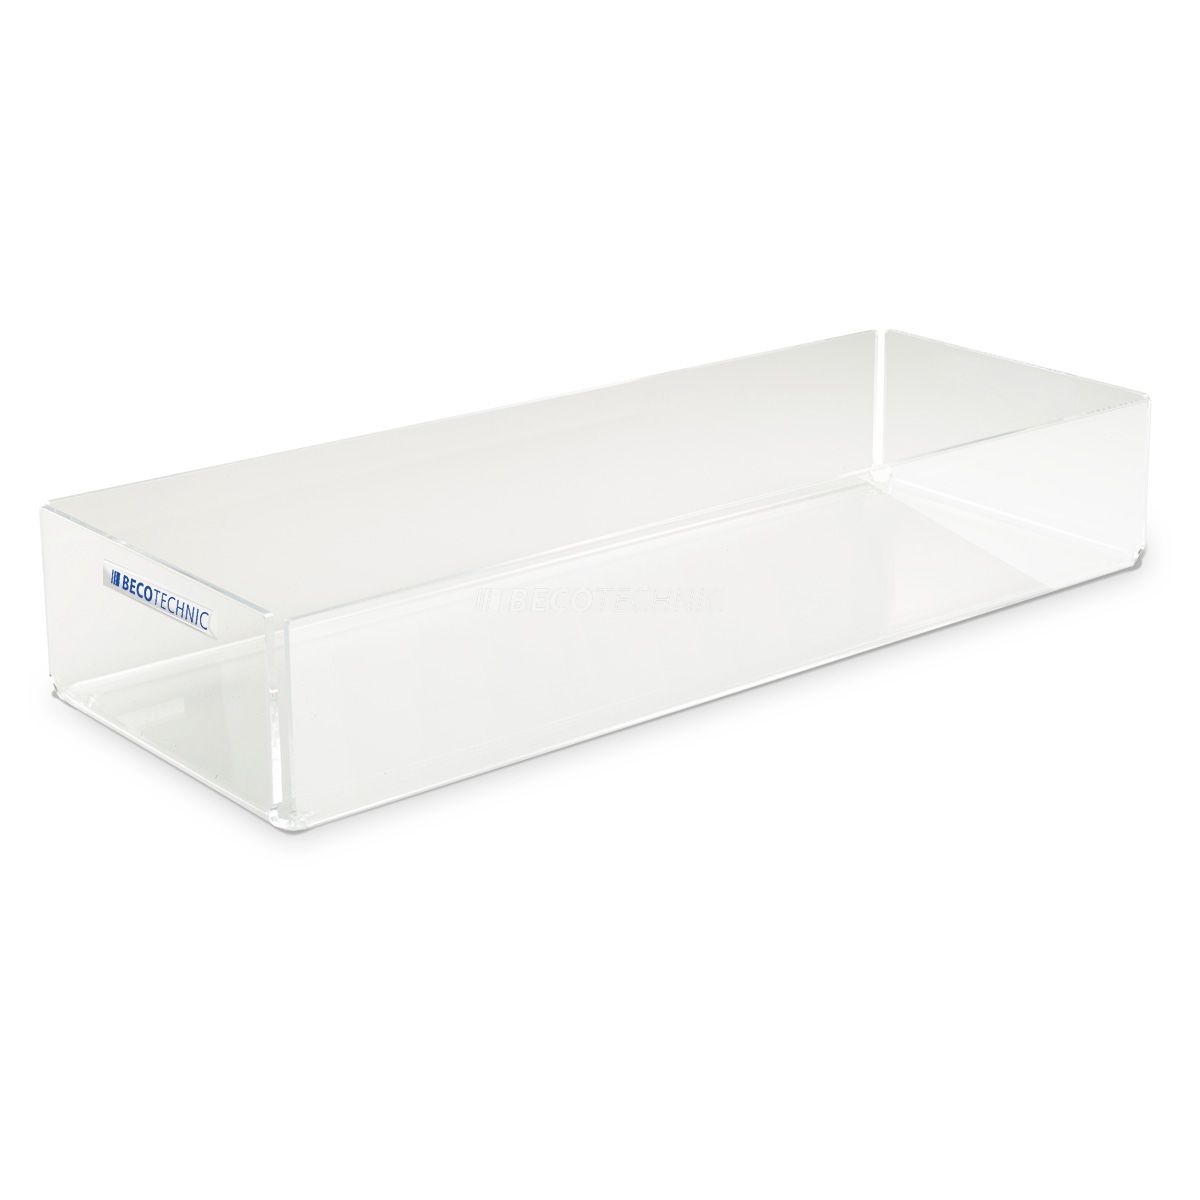 Storage tray made of acrylic for tools and consumables